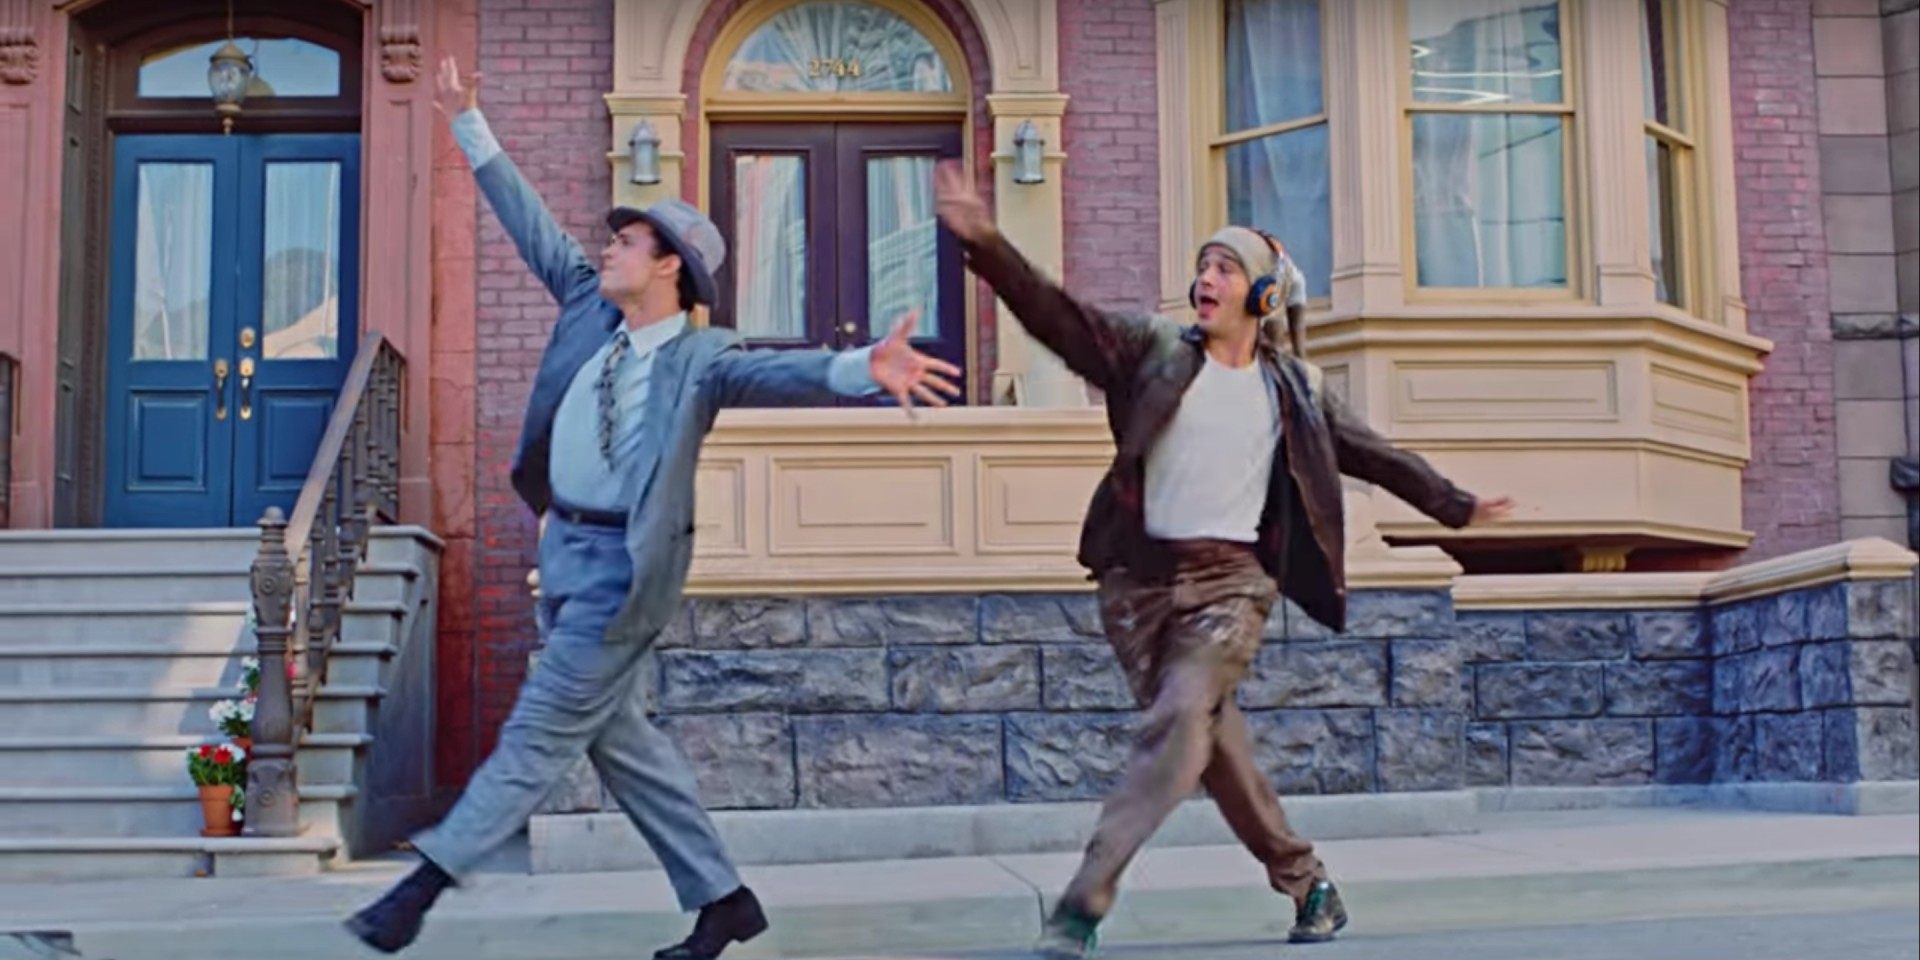 The 1975 celebrates the joyous power of dance in new music video,  'Sincerity Is Scary'